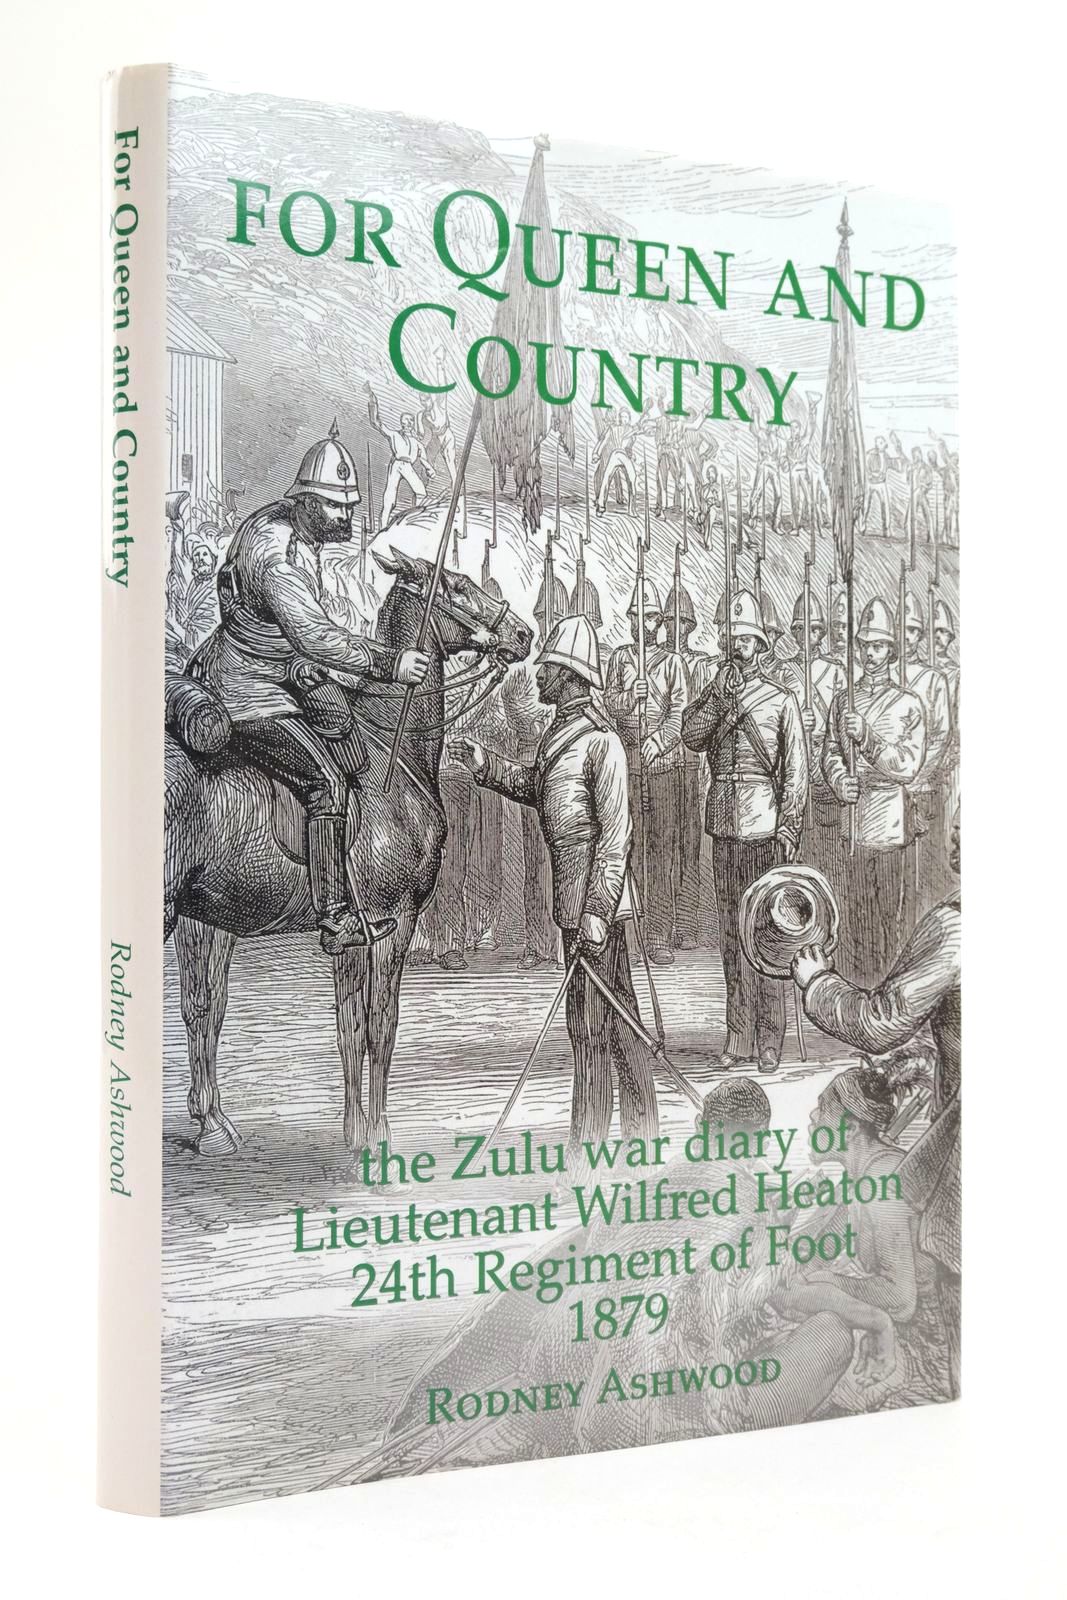 Photo of FOR QUEEN AND COUNTRY written by Ashwood, Rodney published by Serendipity (STOCK CODE: 2138406)  for sale by Stella & Rose's Books